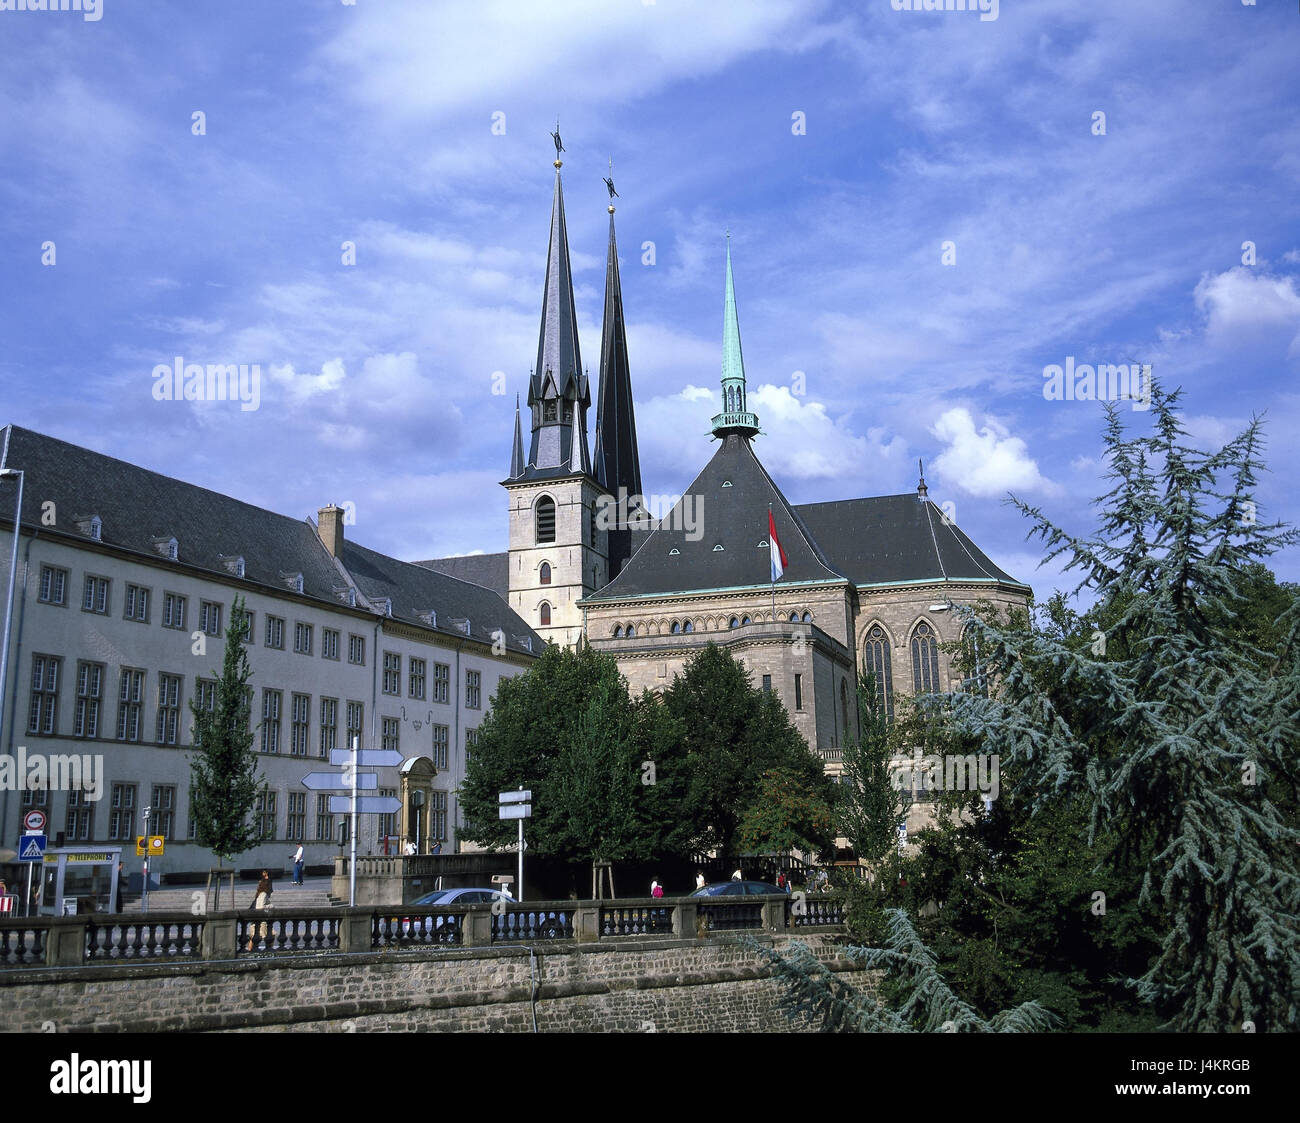 Luxembourg, town view, Palce de la Constitution, cathedral Notre lady outside, Benelux, Luxembourg, dukedom, Grand Duchy, city state, capital, seat of power, landmark, place of interest, church, dear woman's cathedral, Notre lady, building, structure, architecture, architectural style, Late-Gothic Stock Photo